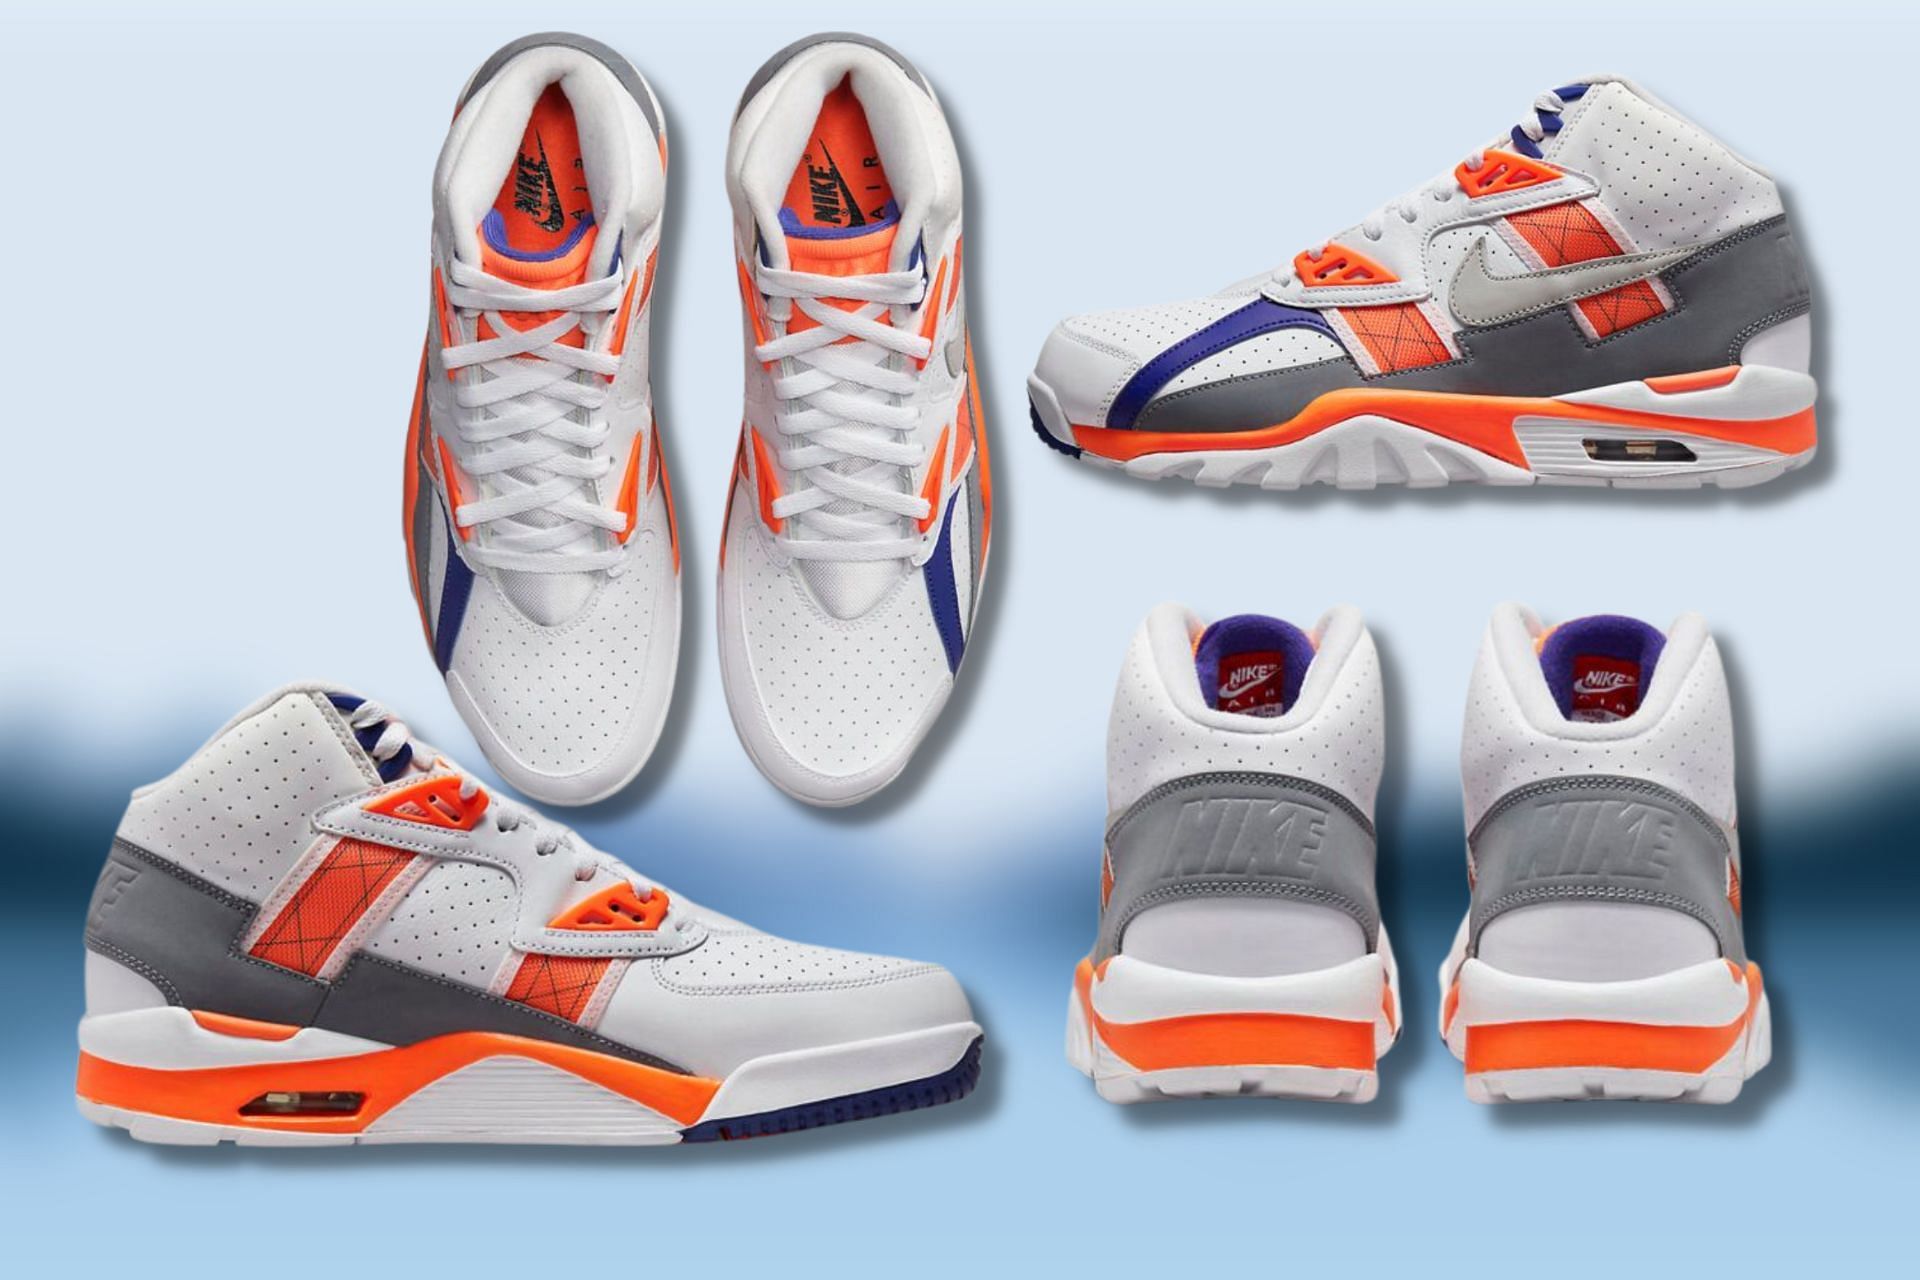 grupo Alentar ballena azul Where to buy Bo Jackson's Nike Air Trainer SC High “Auburn” shoes? Price,  release date, and more details explored